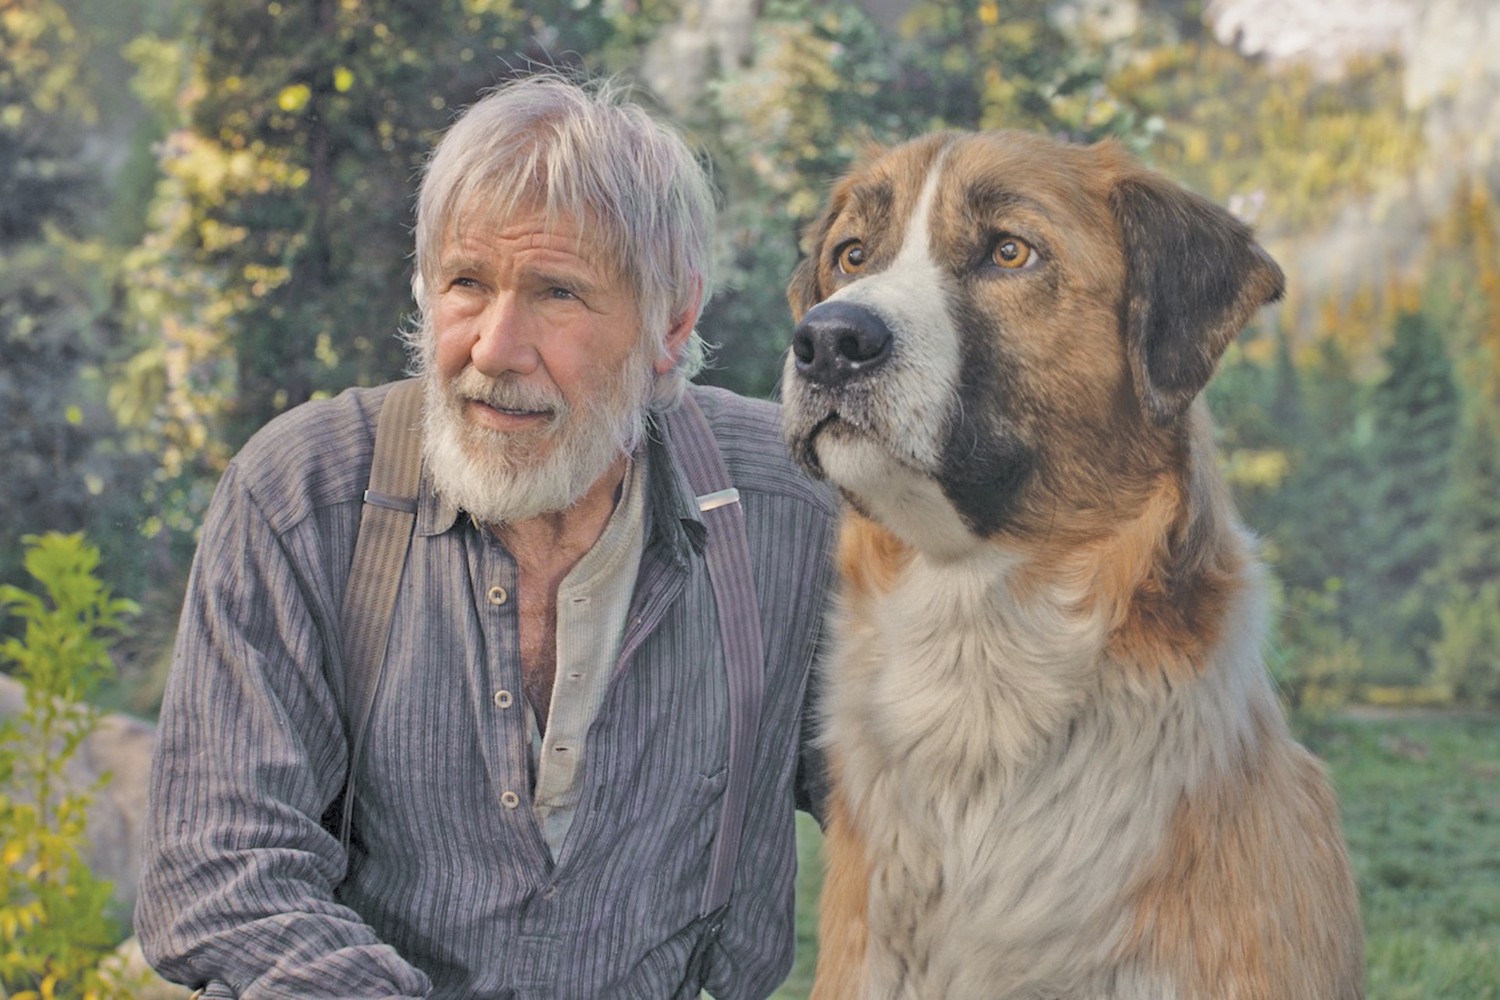 Harrison Ford Cgi Dog Star In New Adaptation Of Call Of The Wild Film Features Cleveland Cleveland Scene